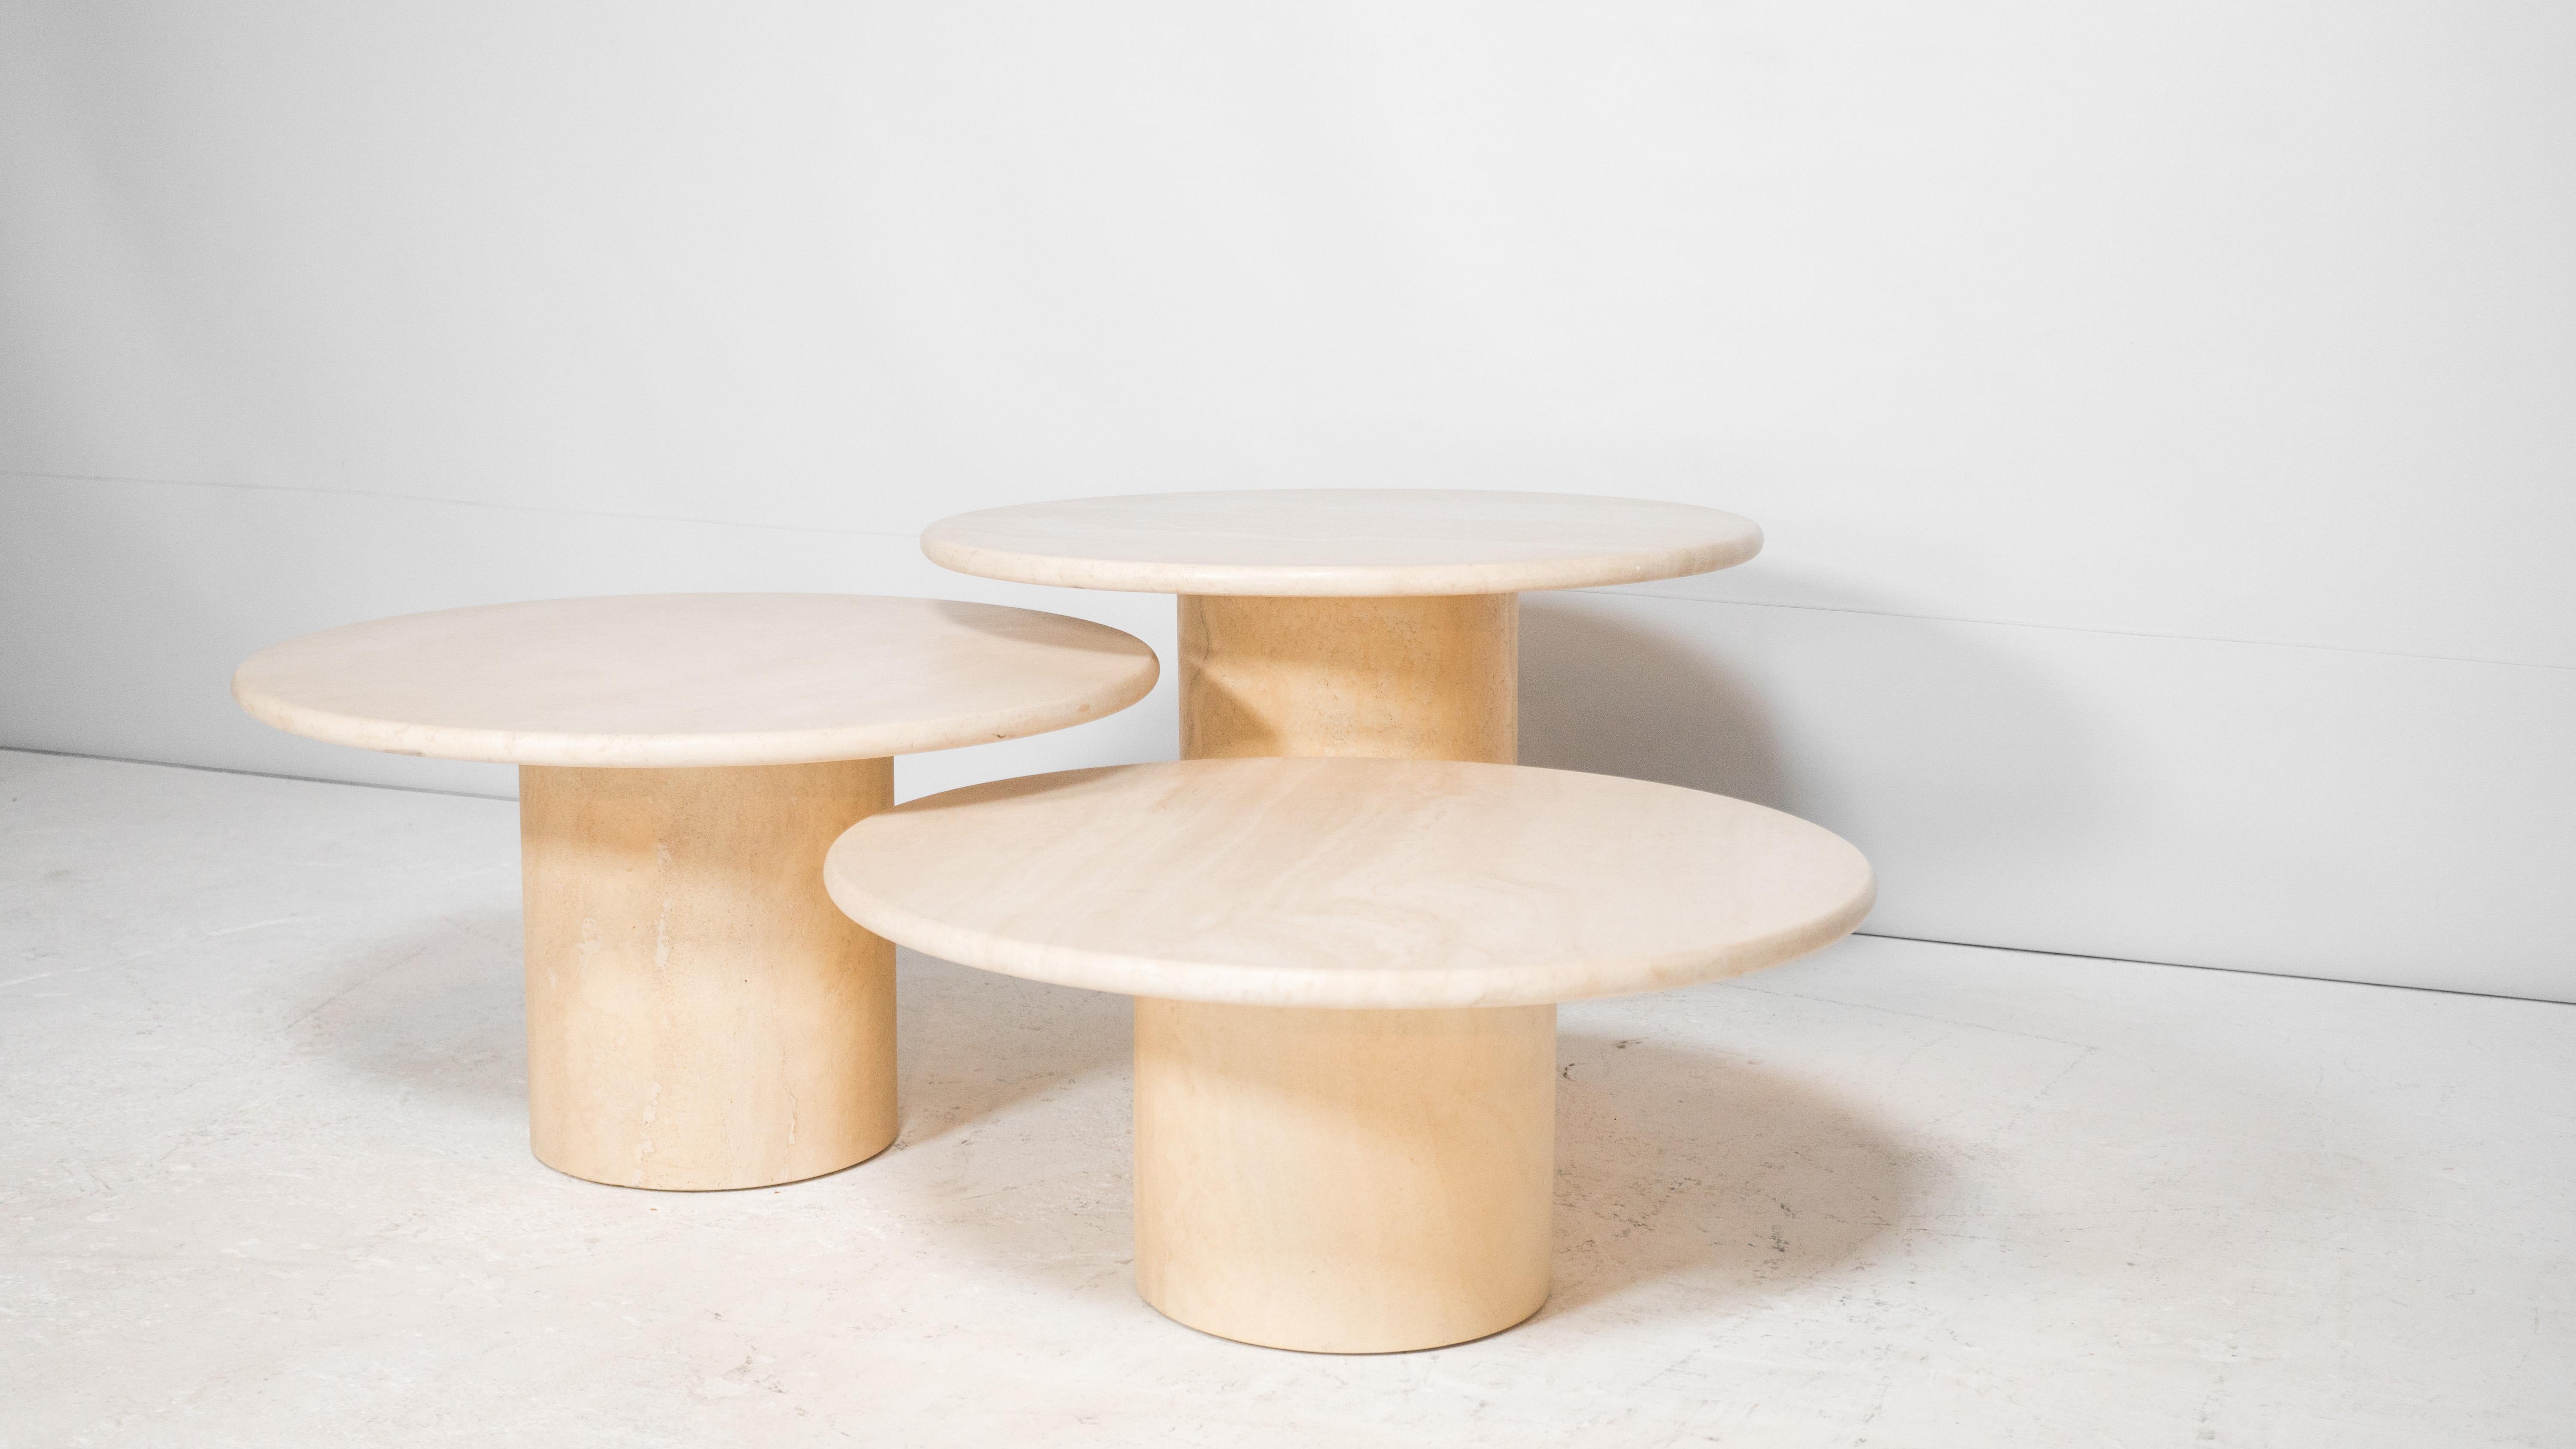 Vintage Italian Travertine round nesting or coffee tables, circa 1970s. Comprised of three tables that vary in height, allowing the set to have overlapping tops, creating one large coffee table form. Can also be used as individual side tables.